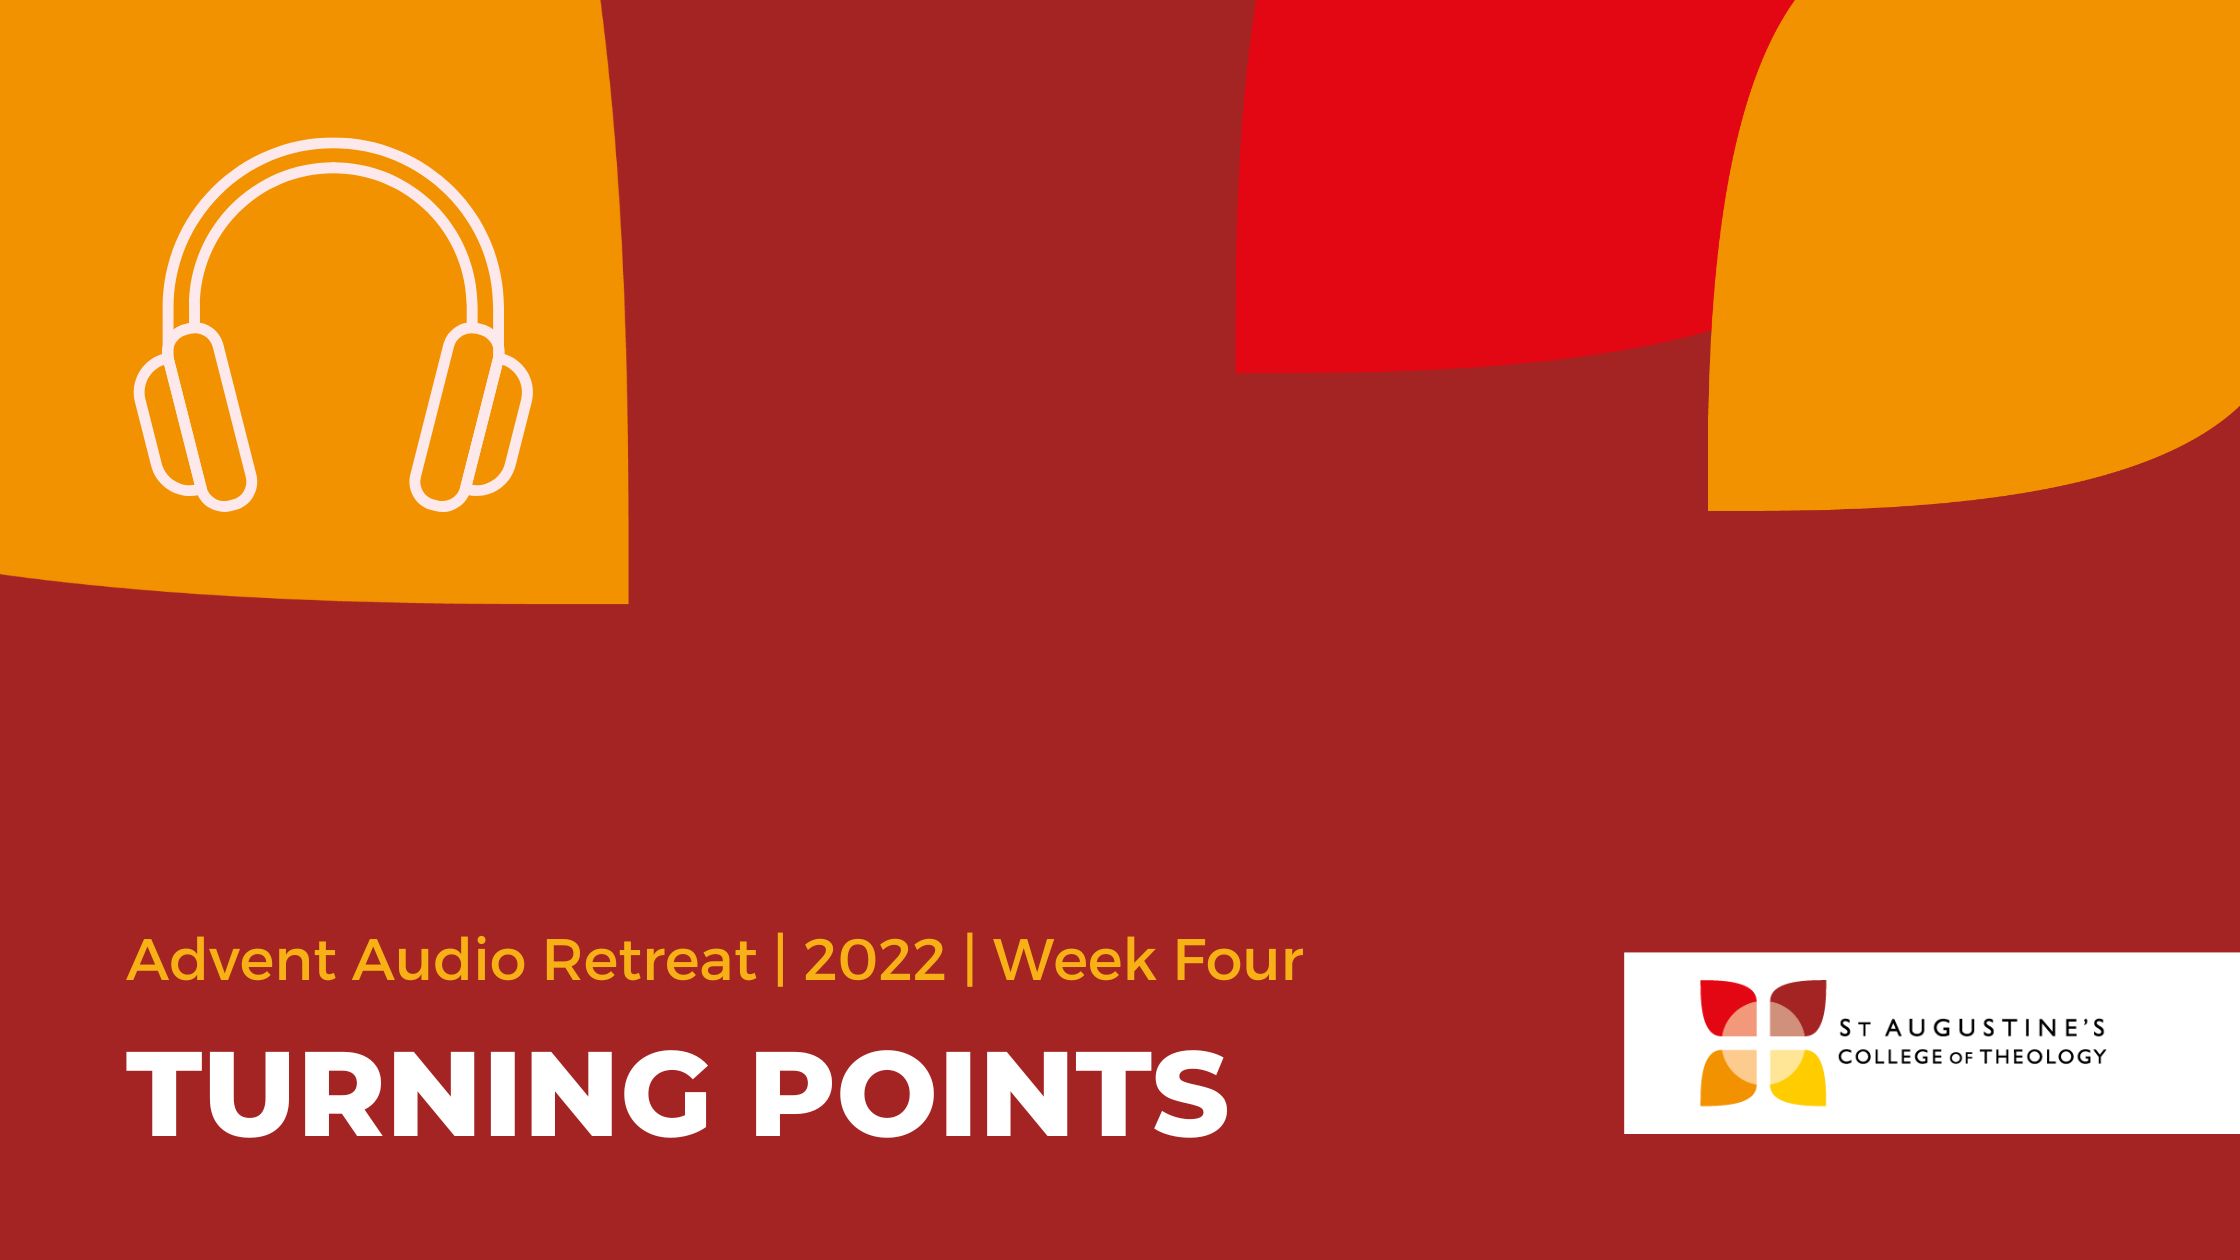 Week four of our Advent Audio Retreat – Turning Points